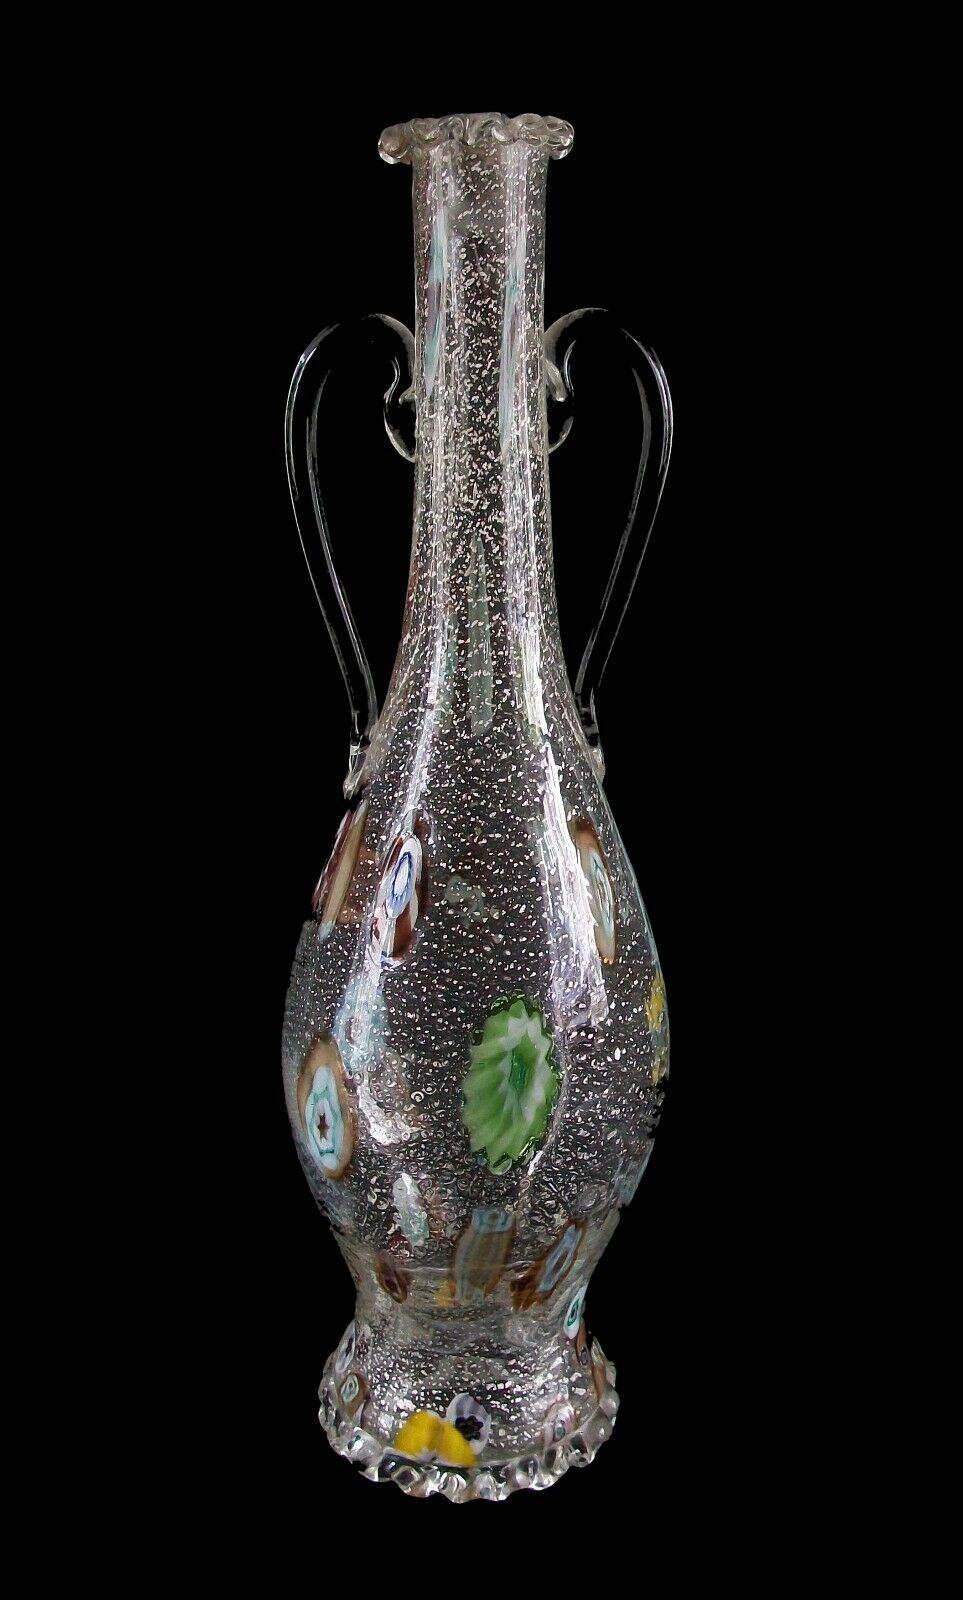 Mid-Century Modern Fratelli Toso - Early Venetian Crystal Millefiori Decanter - Italy - C.1950's For Sale